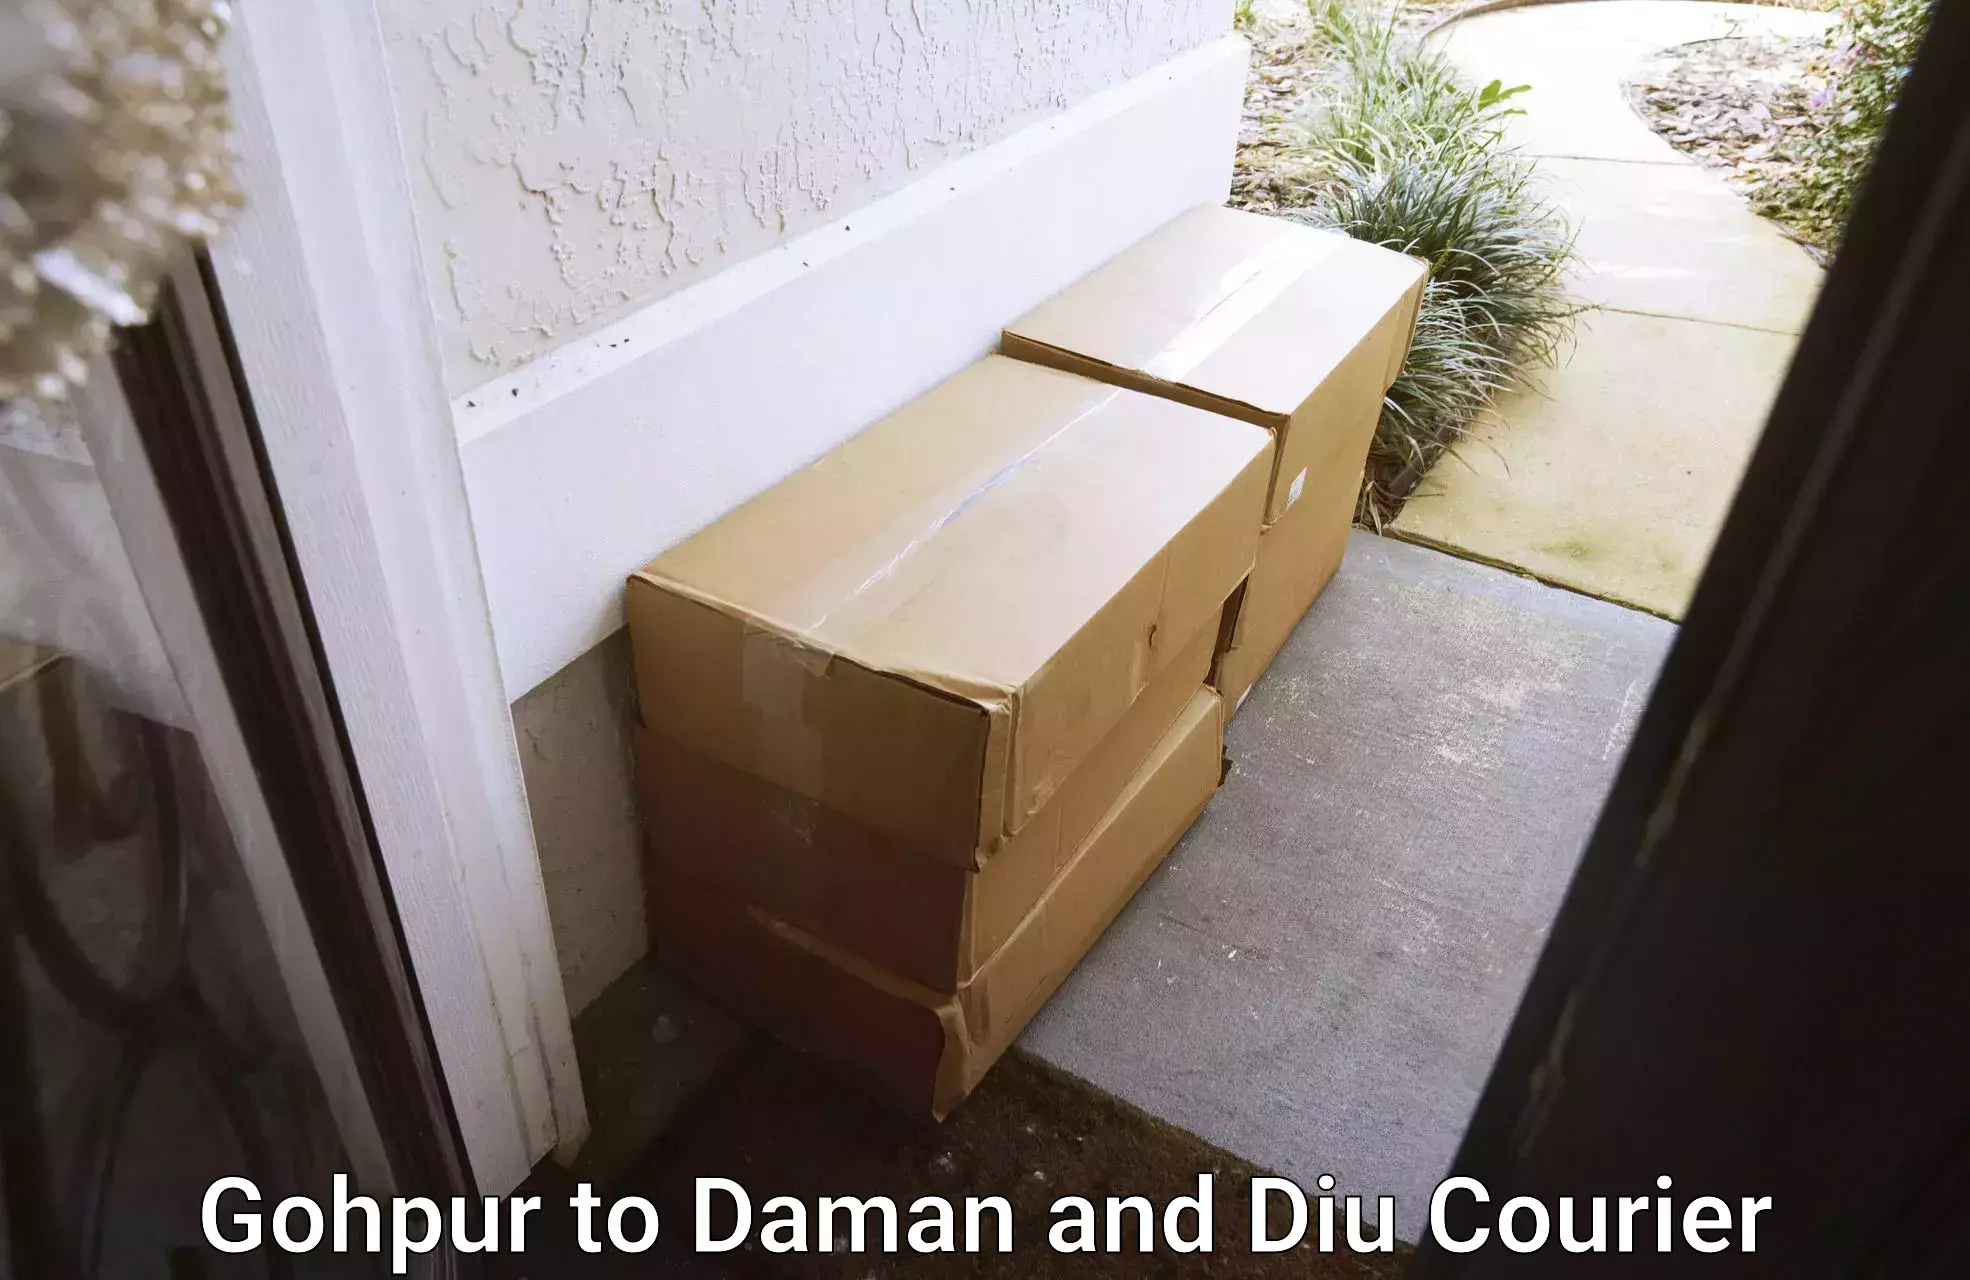 Air courier services in Gohpur to Daman